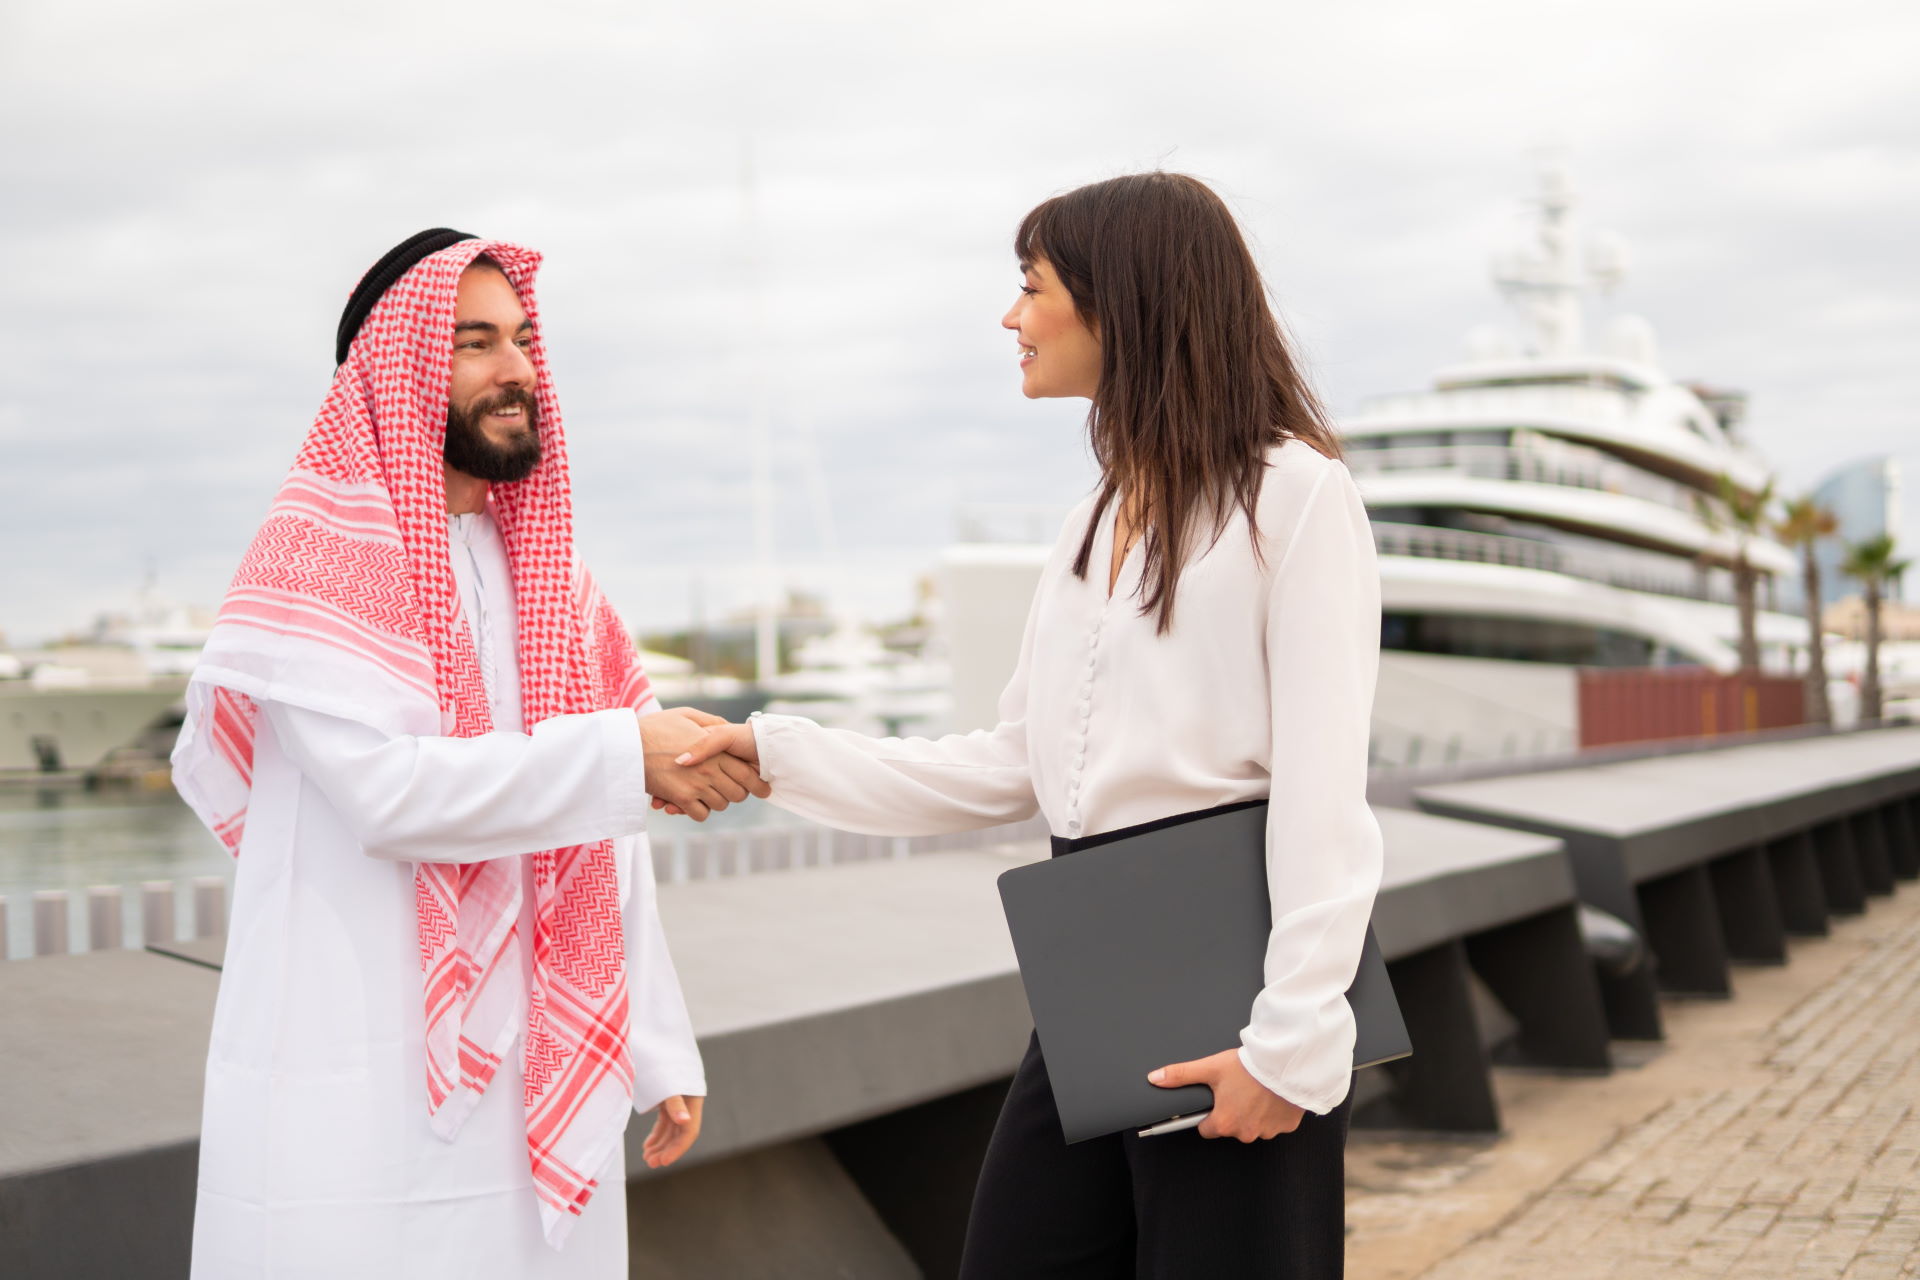 A man with a turban shakes hands with a businesswoman in the marina